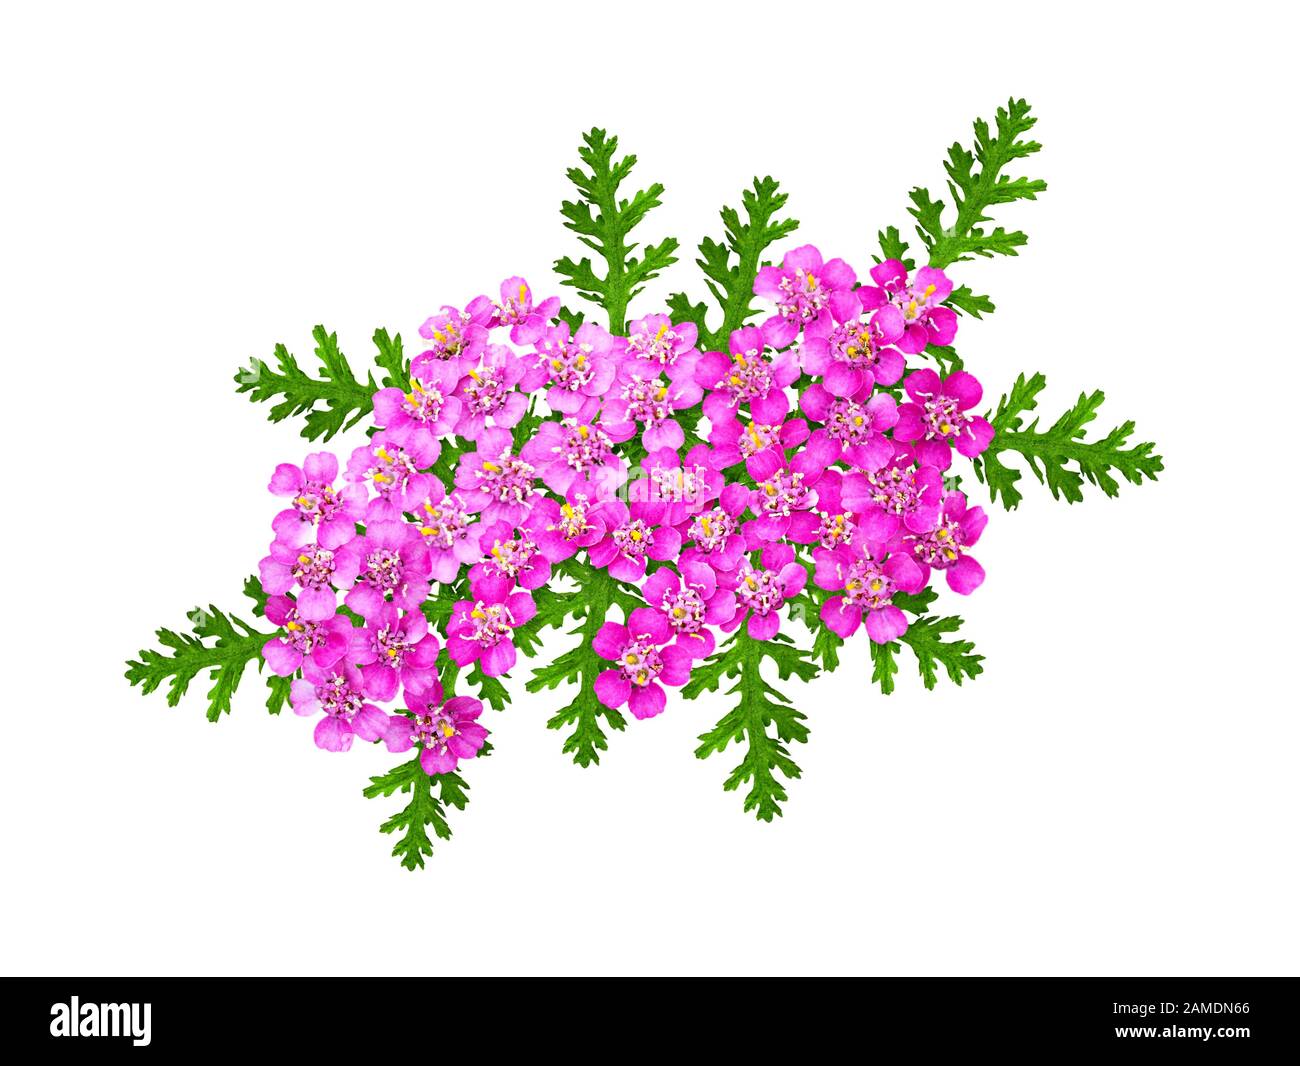 Pink yarrow flowers and leaves in a floral arrangement isolated on white Stock Photo